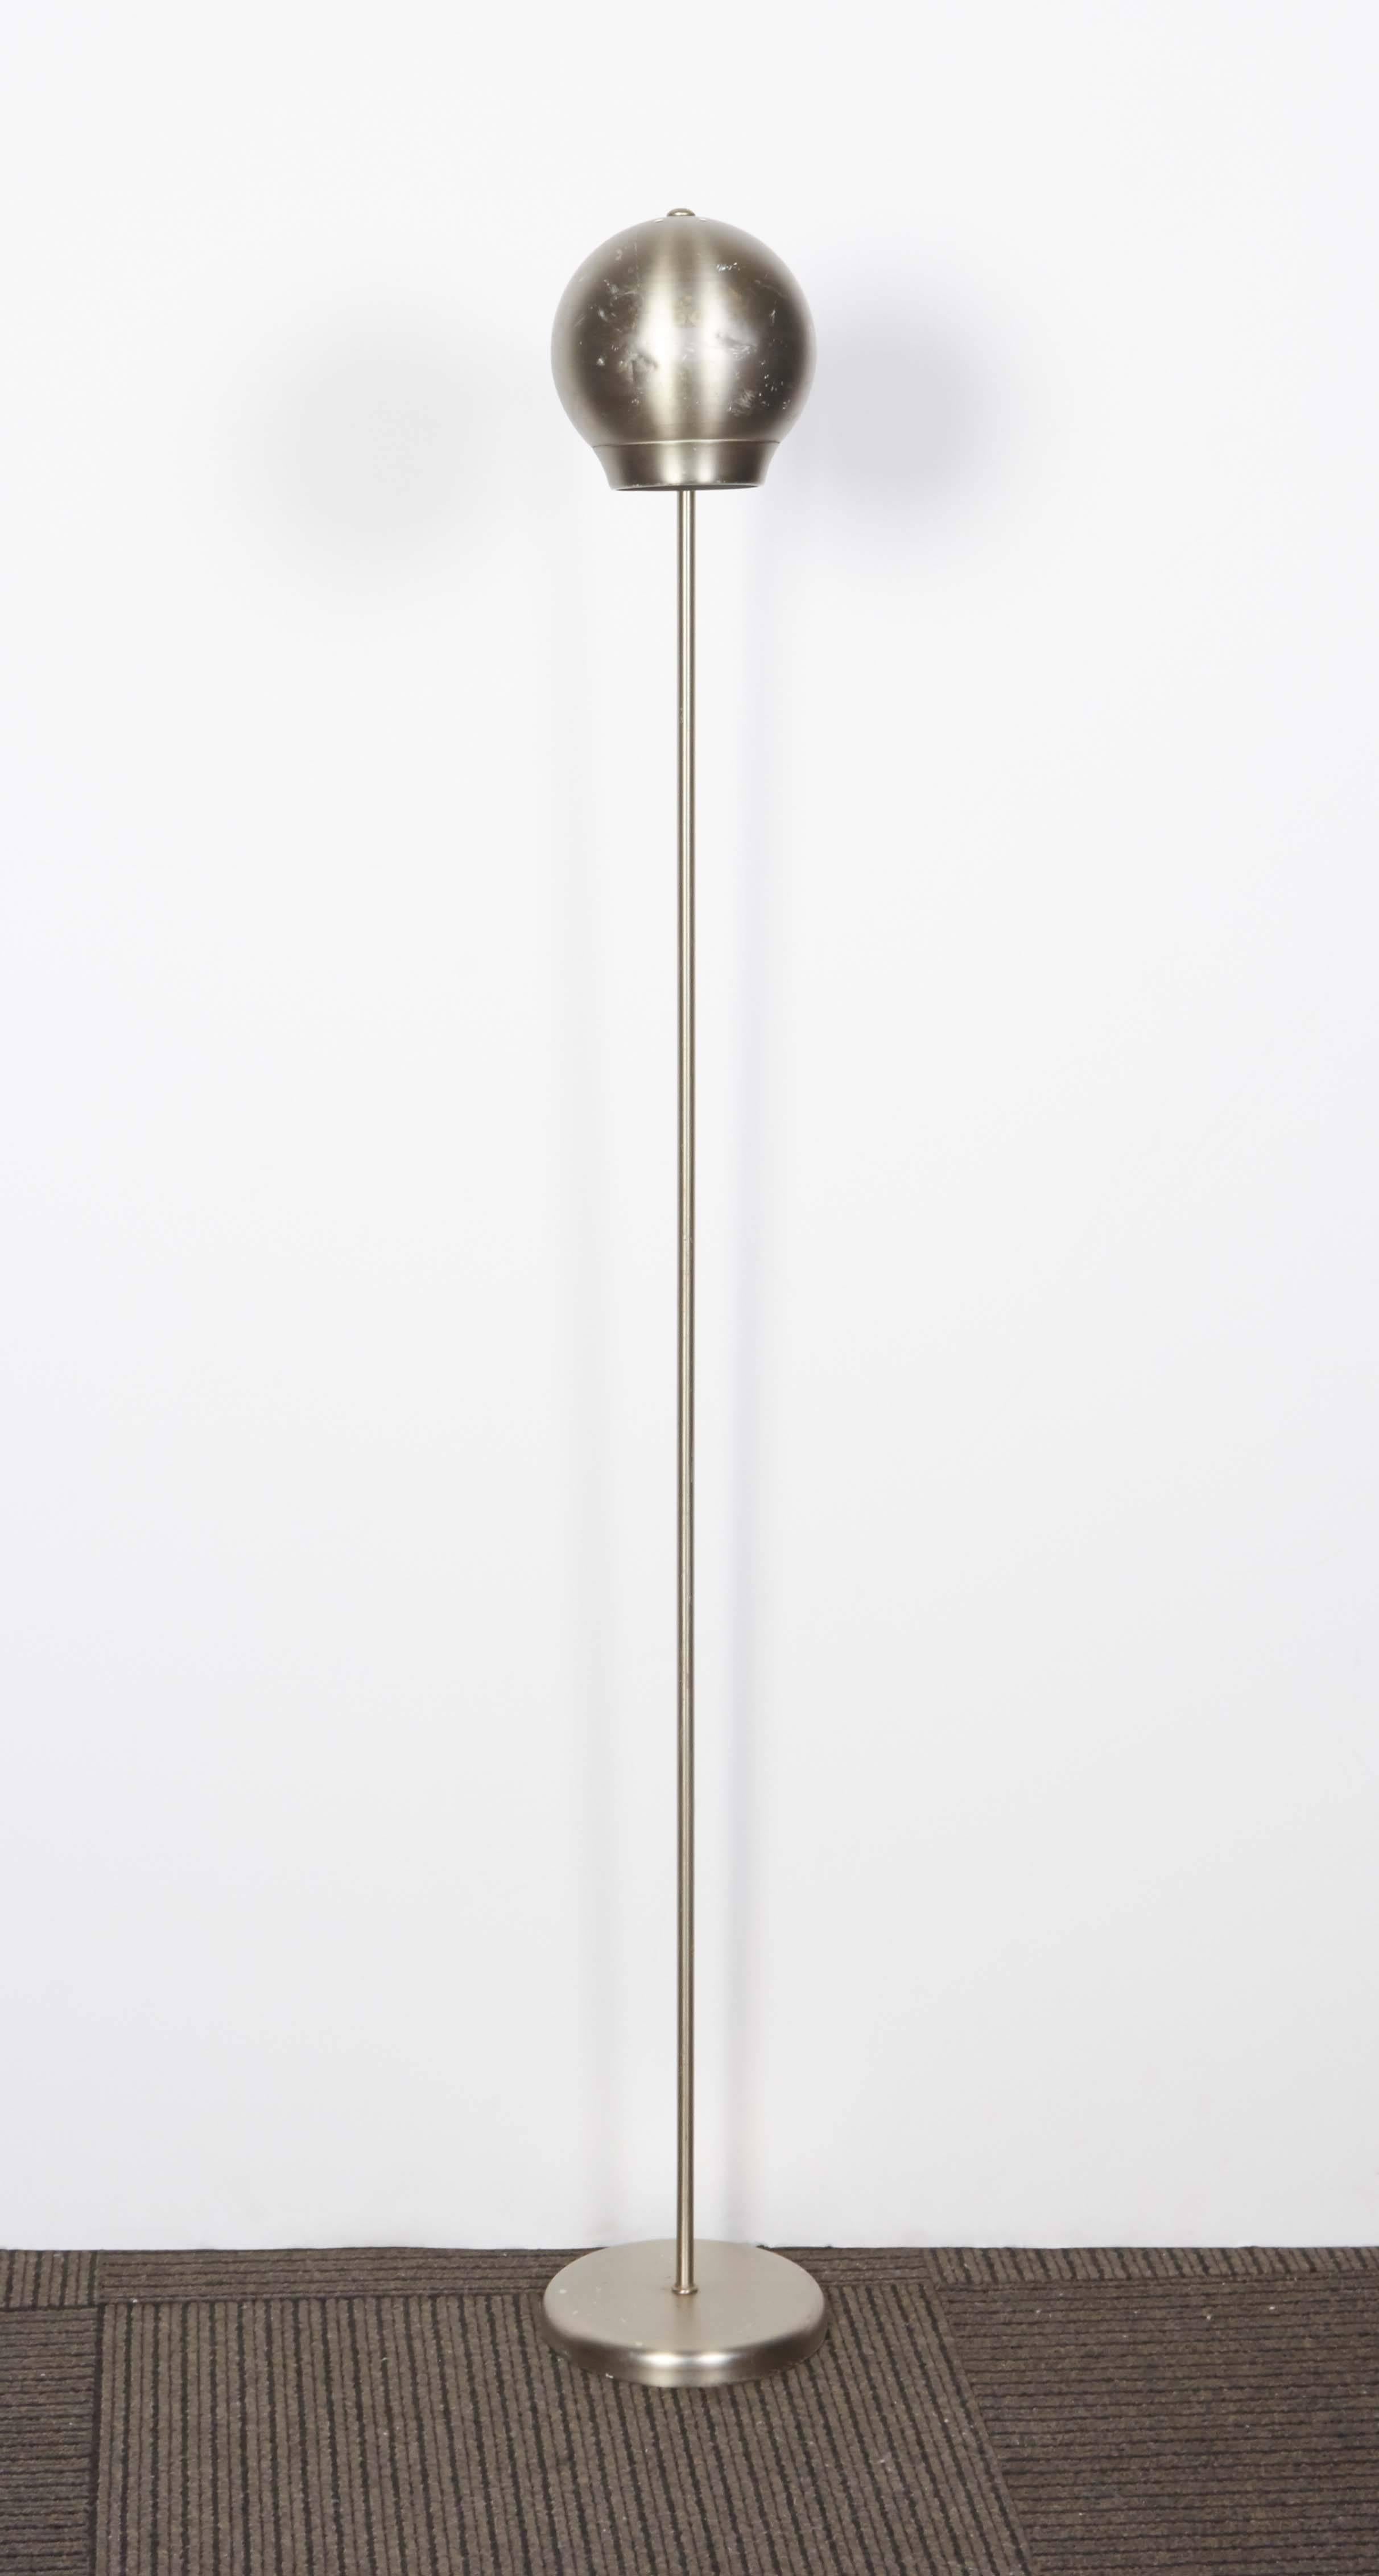 A brushed aluminum floor lamp, evoking the Space Age style, including orb shaped shade with perforated detail, on curved stem and round base. The floor lamp remains in overall good vintage condition, with some presence of wear, including scratches